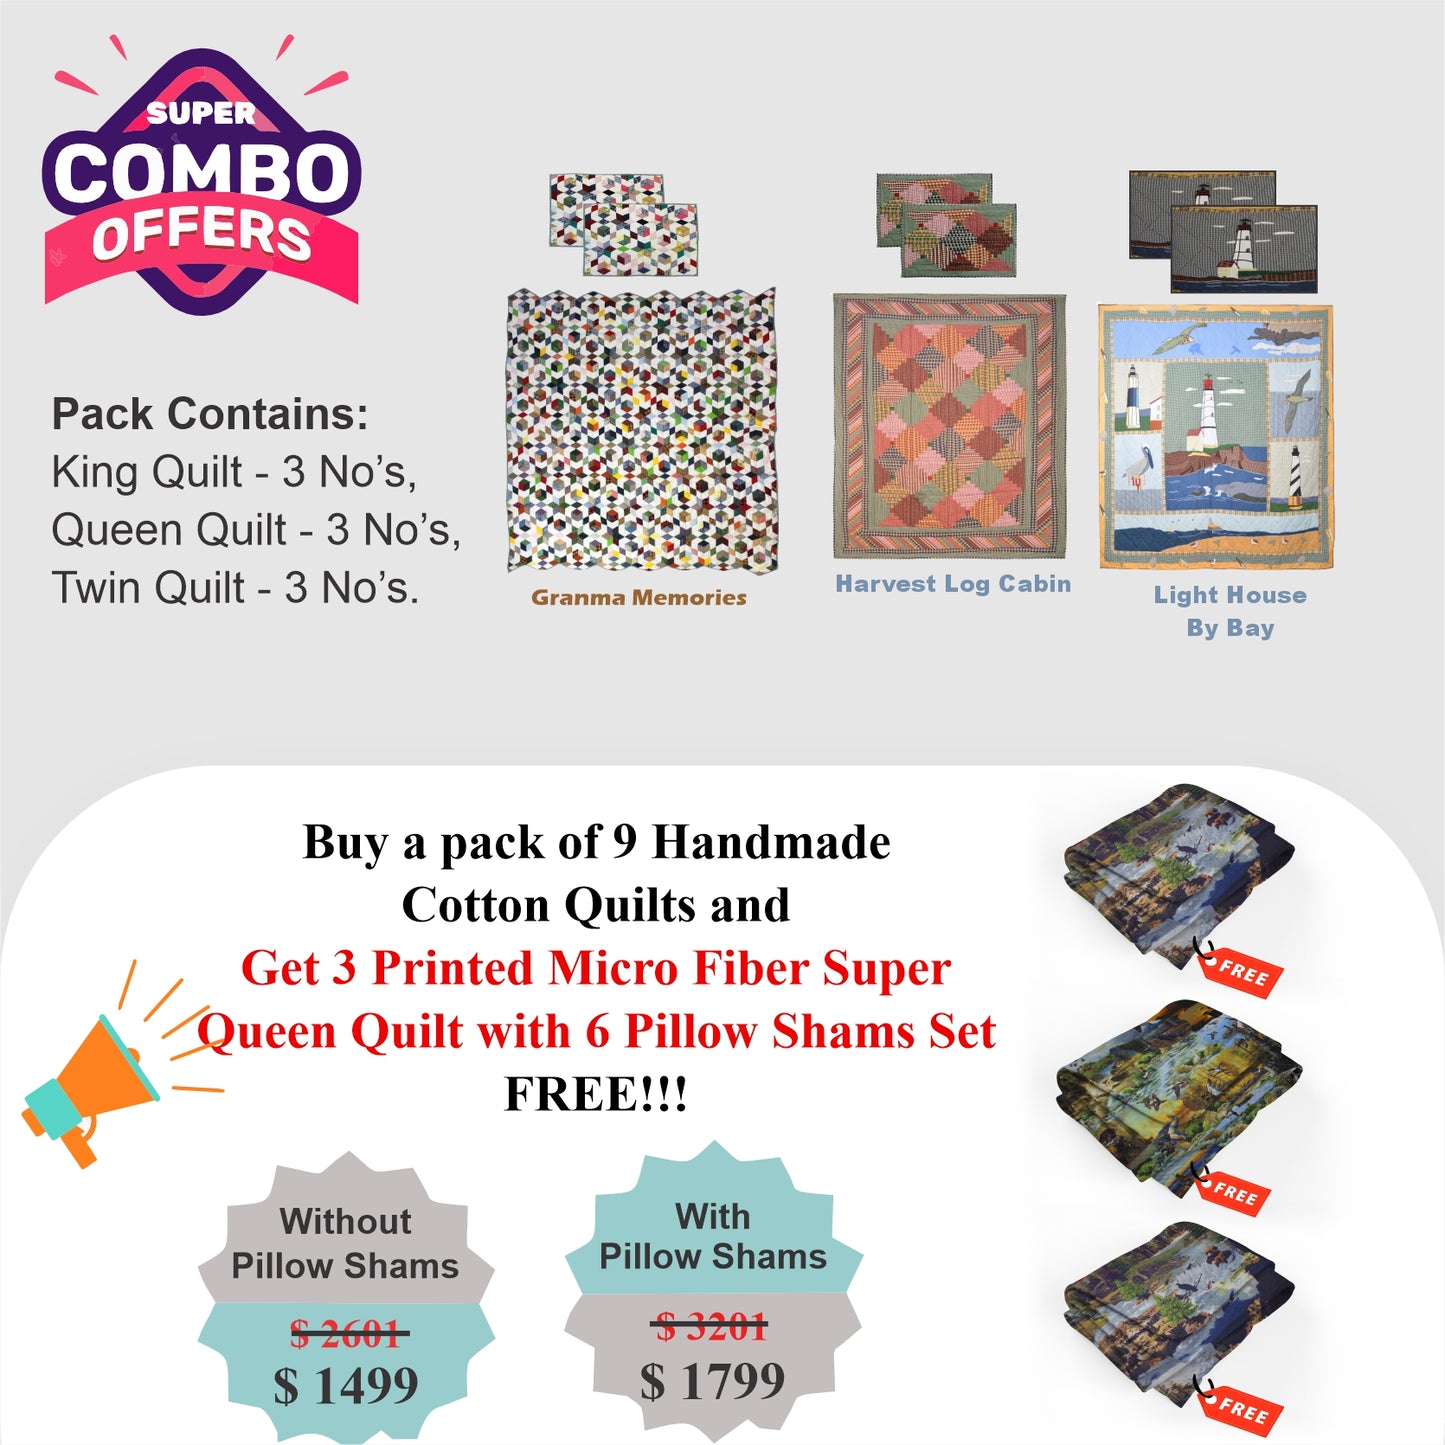 Granma Memory /Harvest Log Cabin/ Light house - Pack of 9 handmade cotton quilts | Matching Pillow shams | Buy 9 cotton quilts and get 3 Printed Microfiber Super Queen Quilt with 3 Shams set FREE!!!